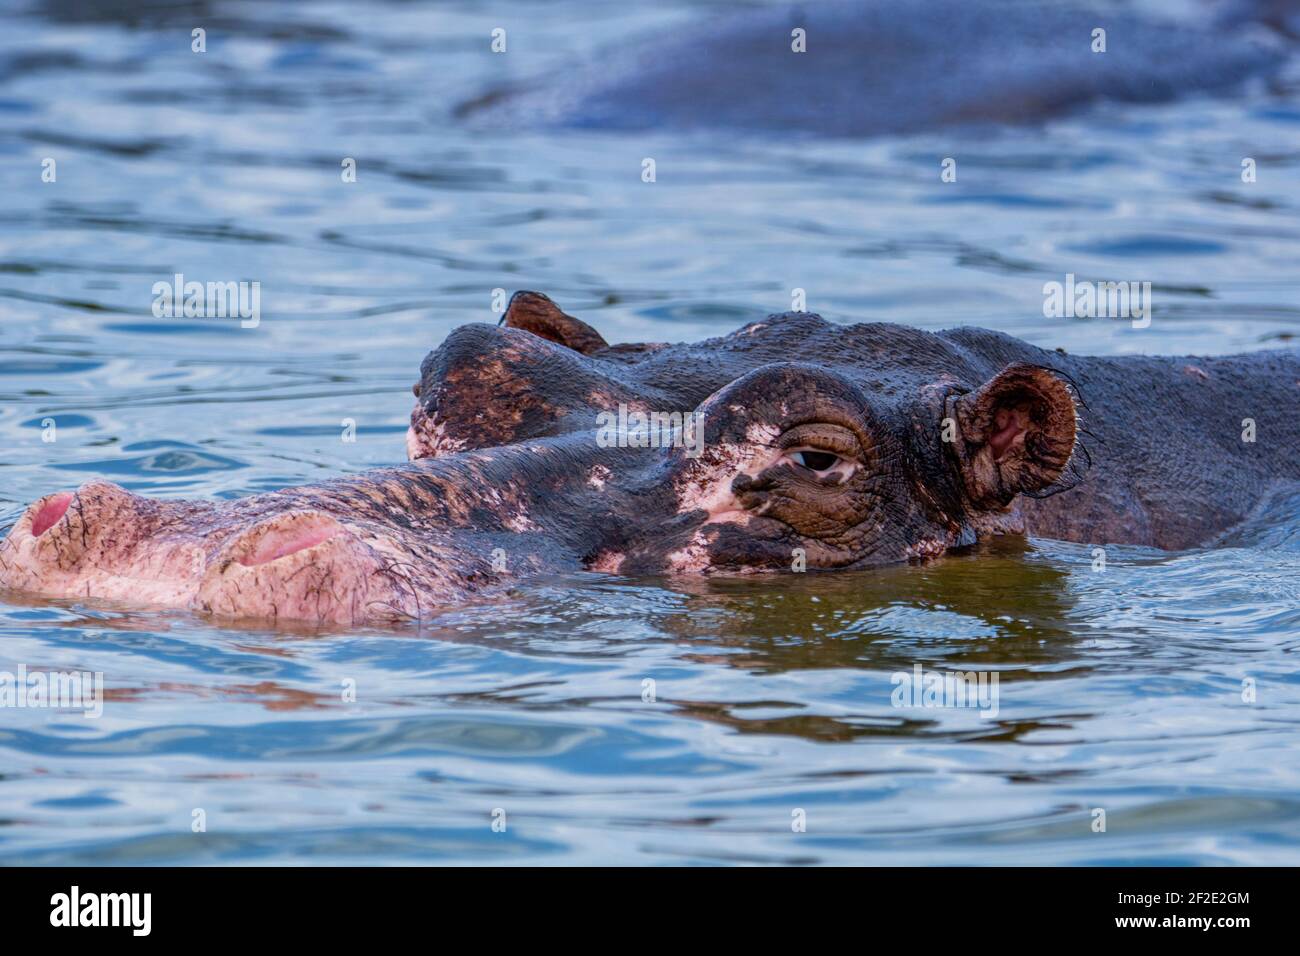 Hippo Head just above water, Closeup, Hippopotamus in Lake Eyes and ears above water. Stock Photo